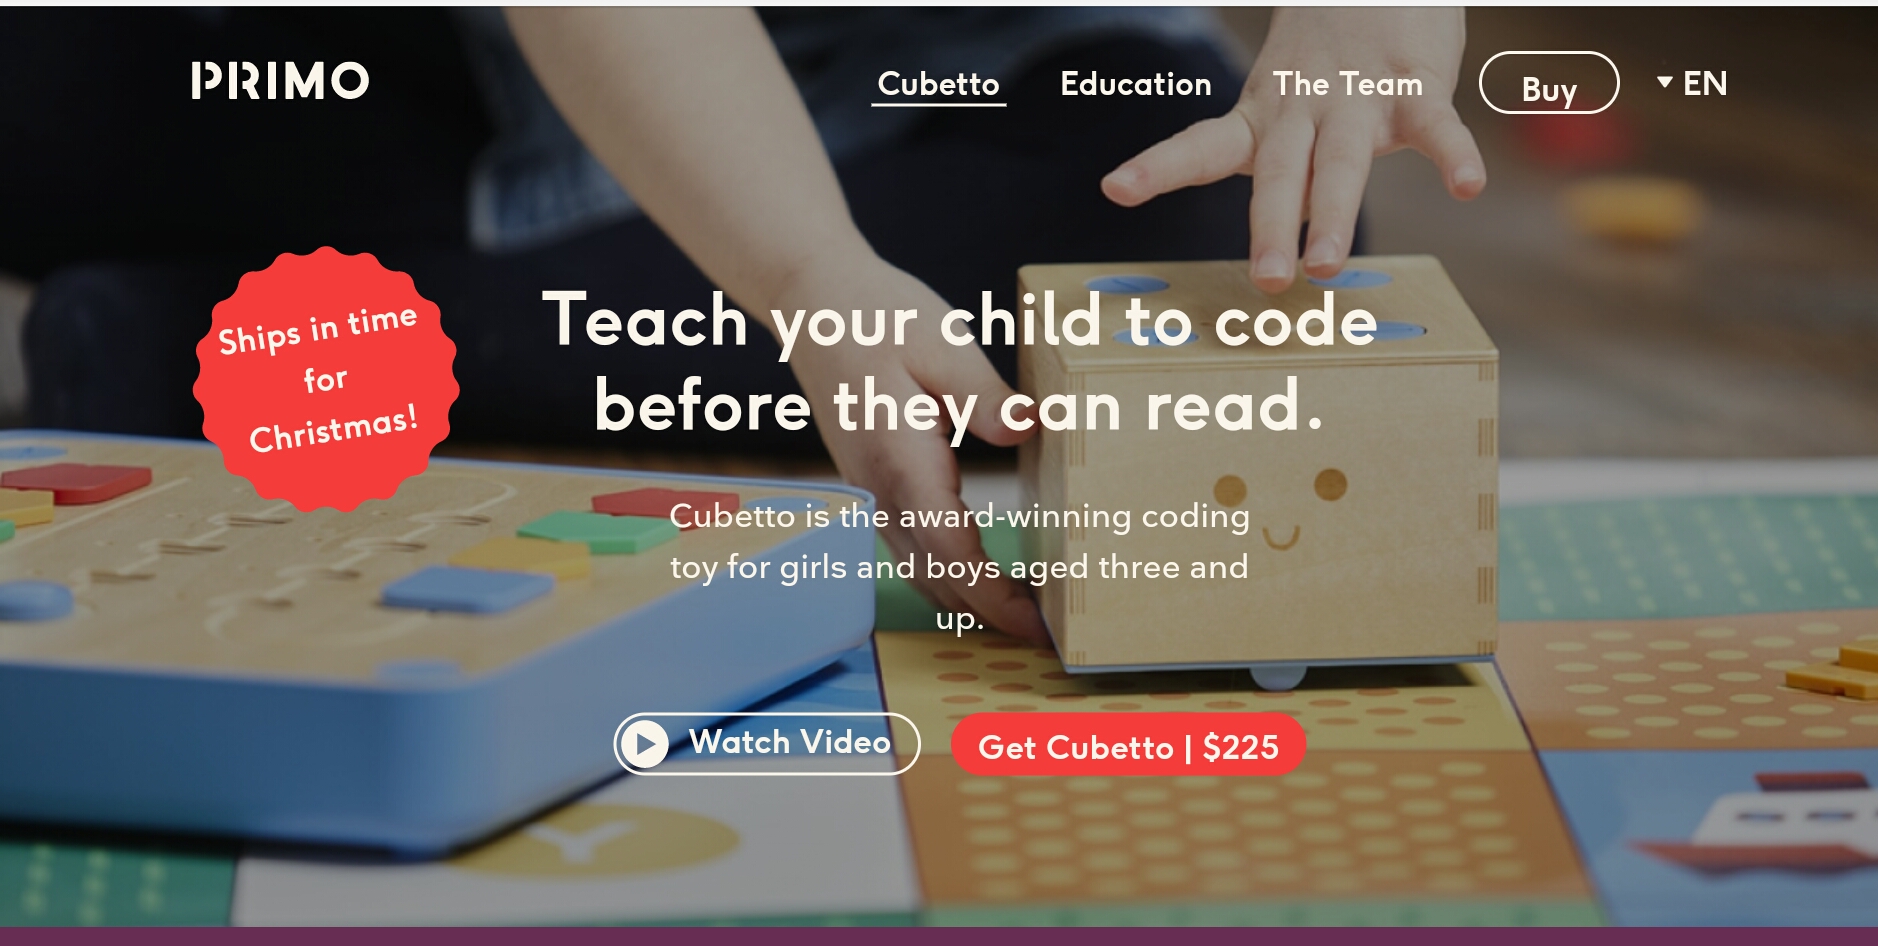 Students can start programming before they can read and write with Cubetto